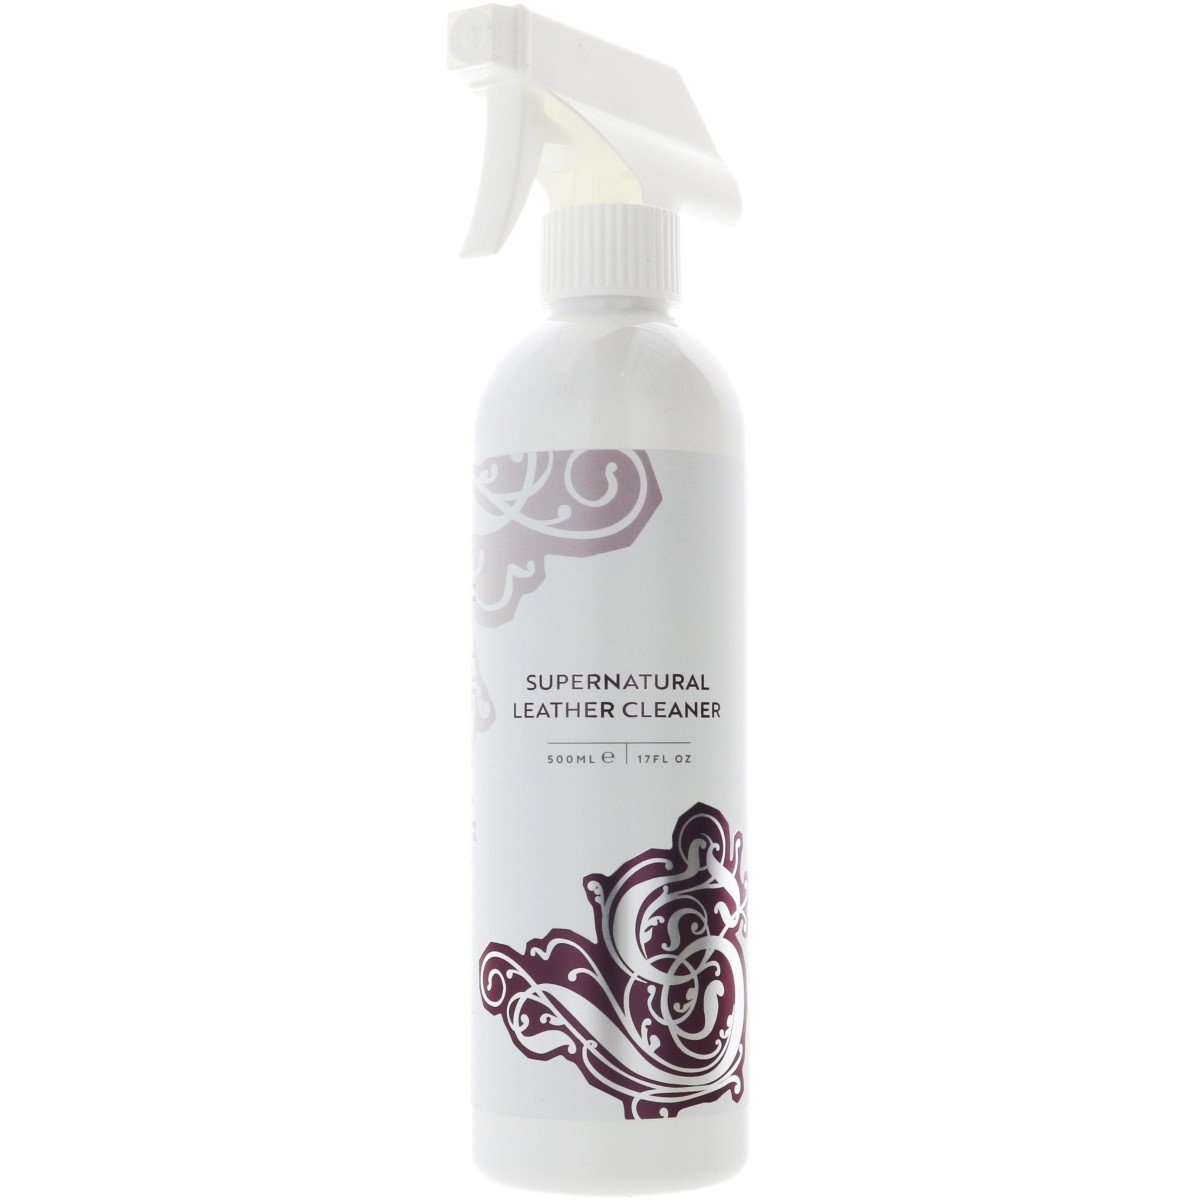 Supernatural Leather Cleaner - 500ml